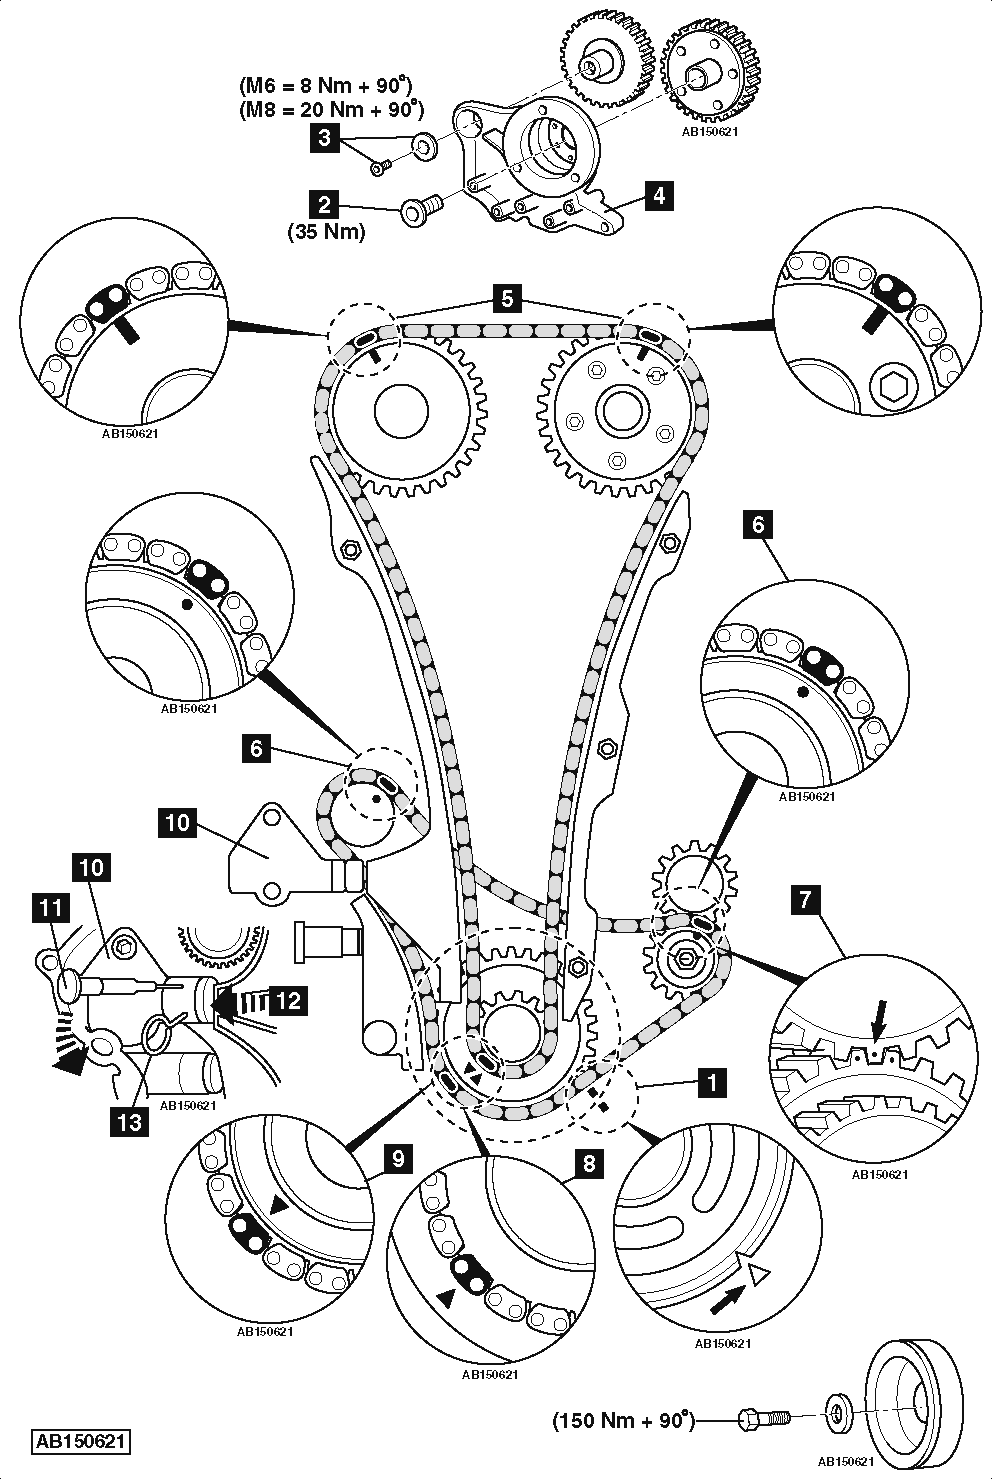 How do you replace a timing chain?